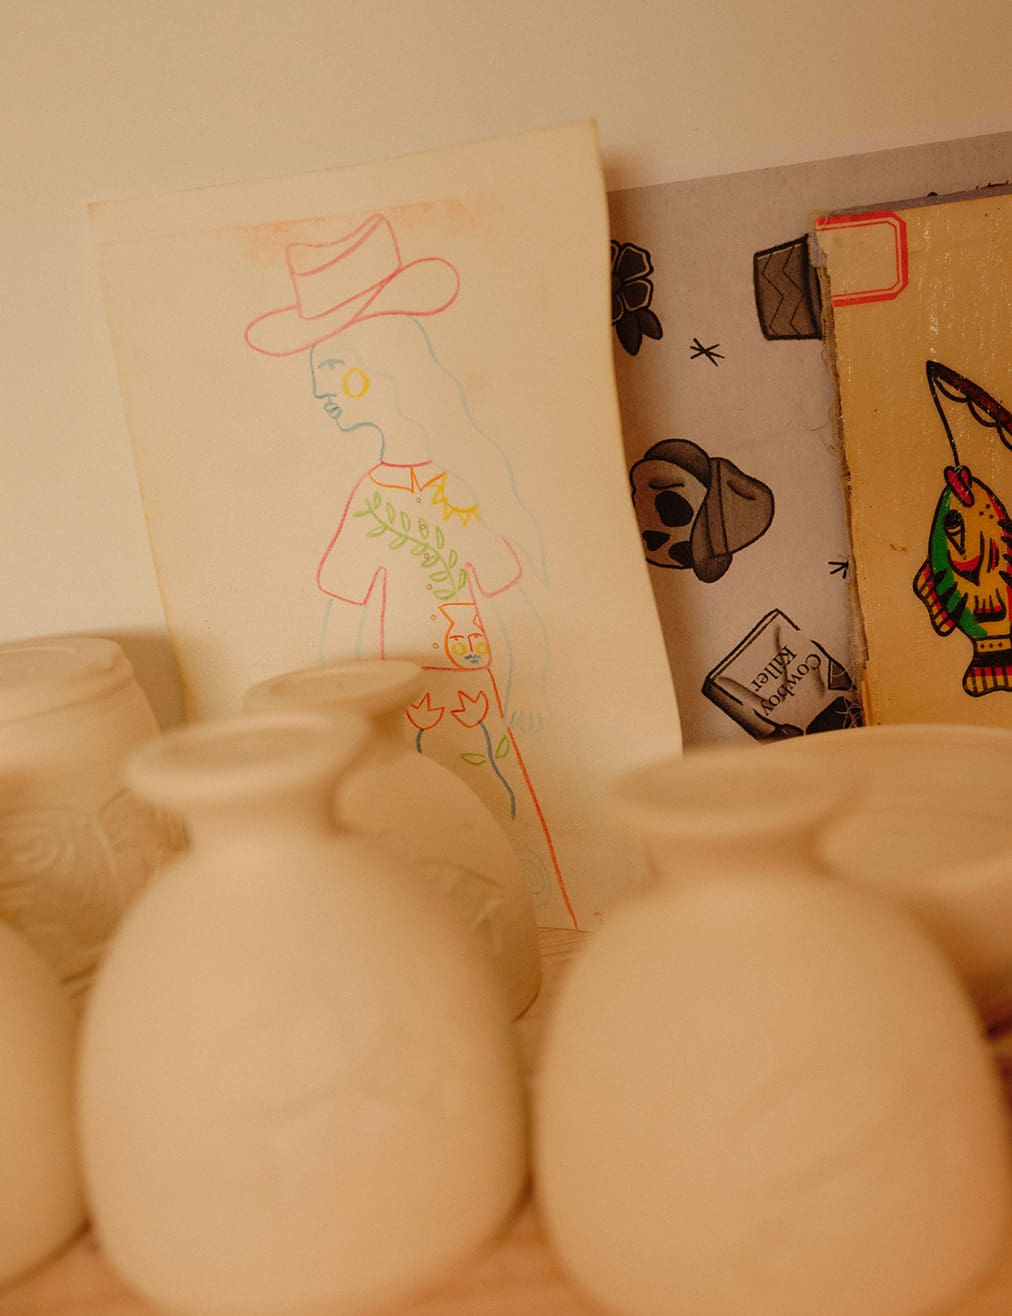 How Did I Get Here with Daniel Dooreck of Danny D's Mud Shop | Unpainted vases resting in the studio with illustration ideas sketched on paper behind.